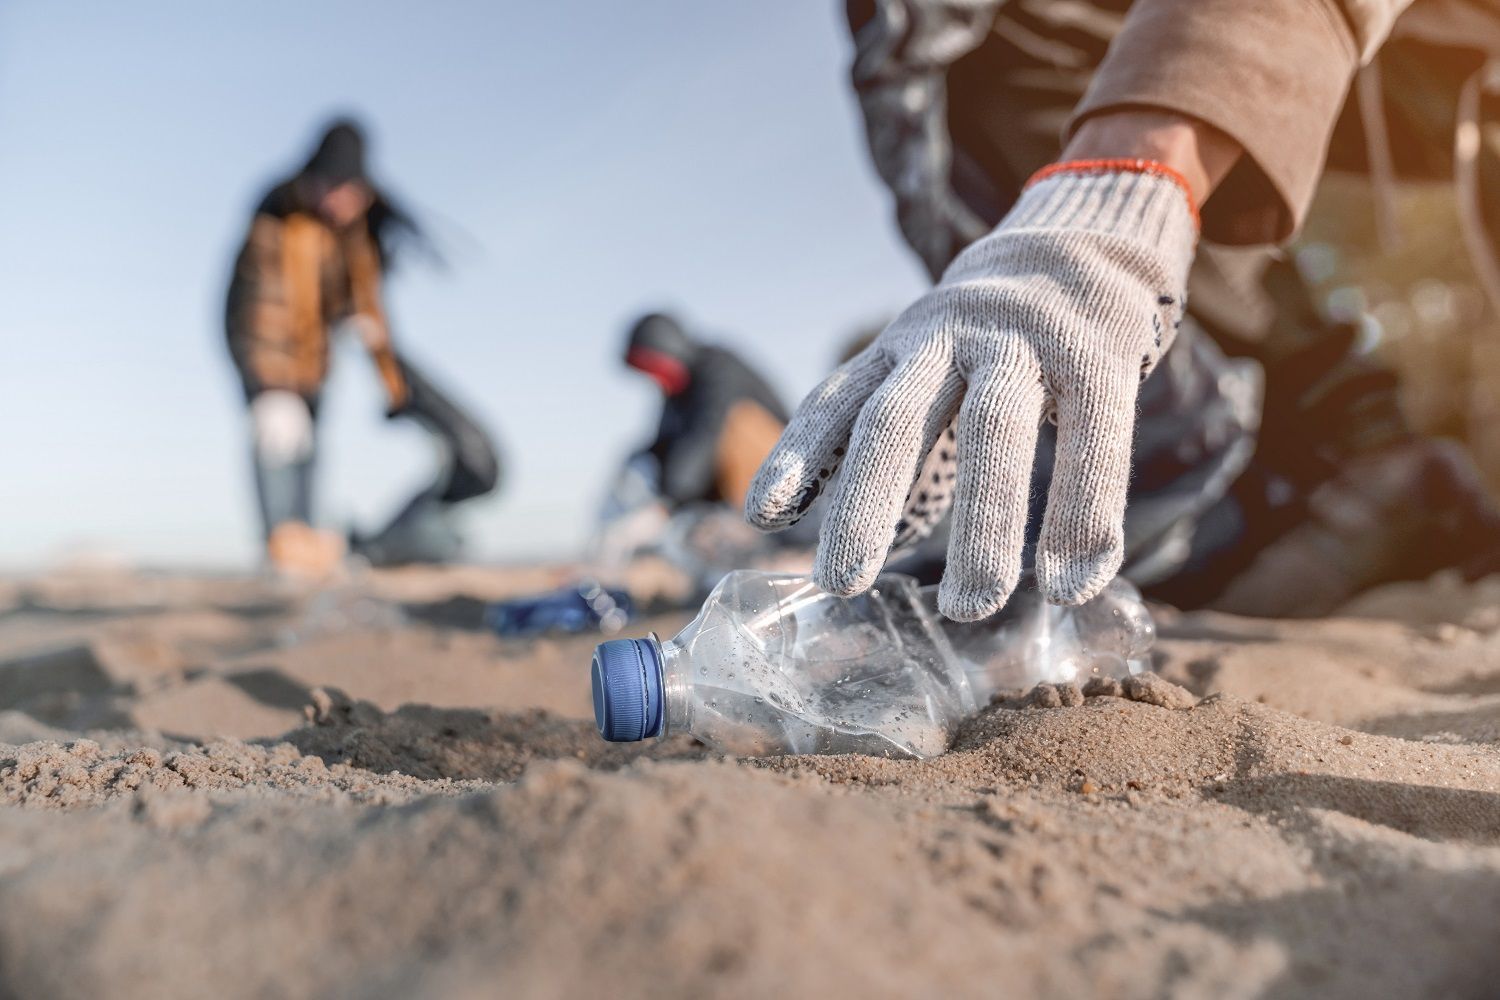 Volunteers cleaning up plastic pollution on the beach.